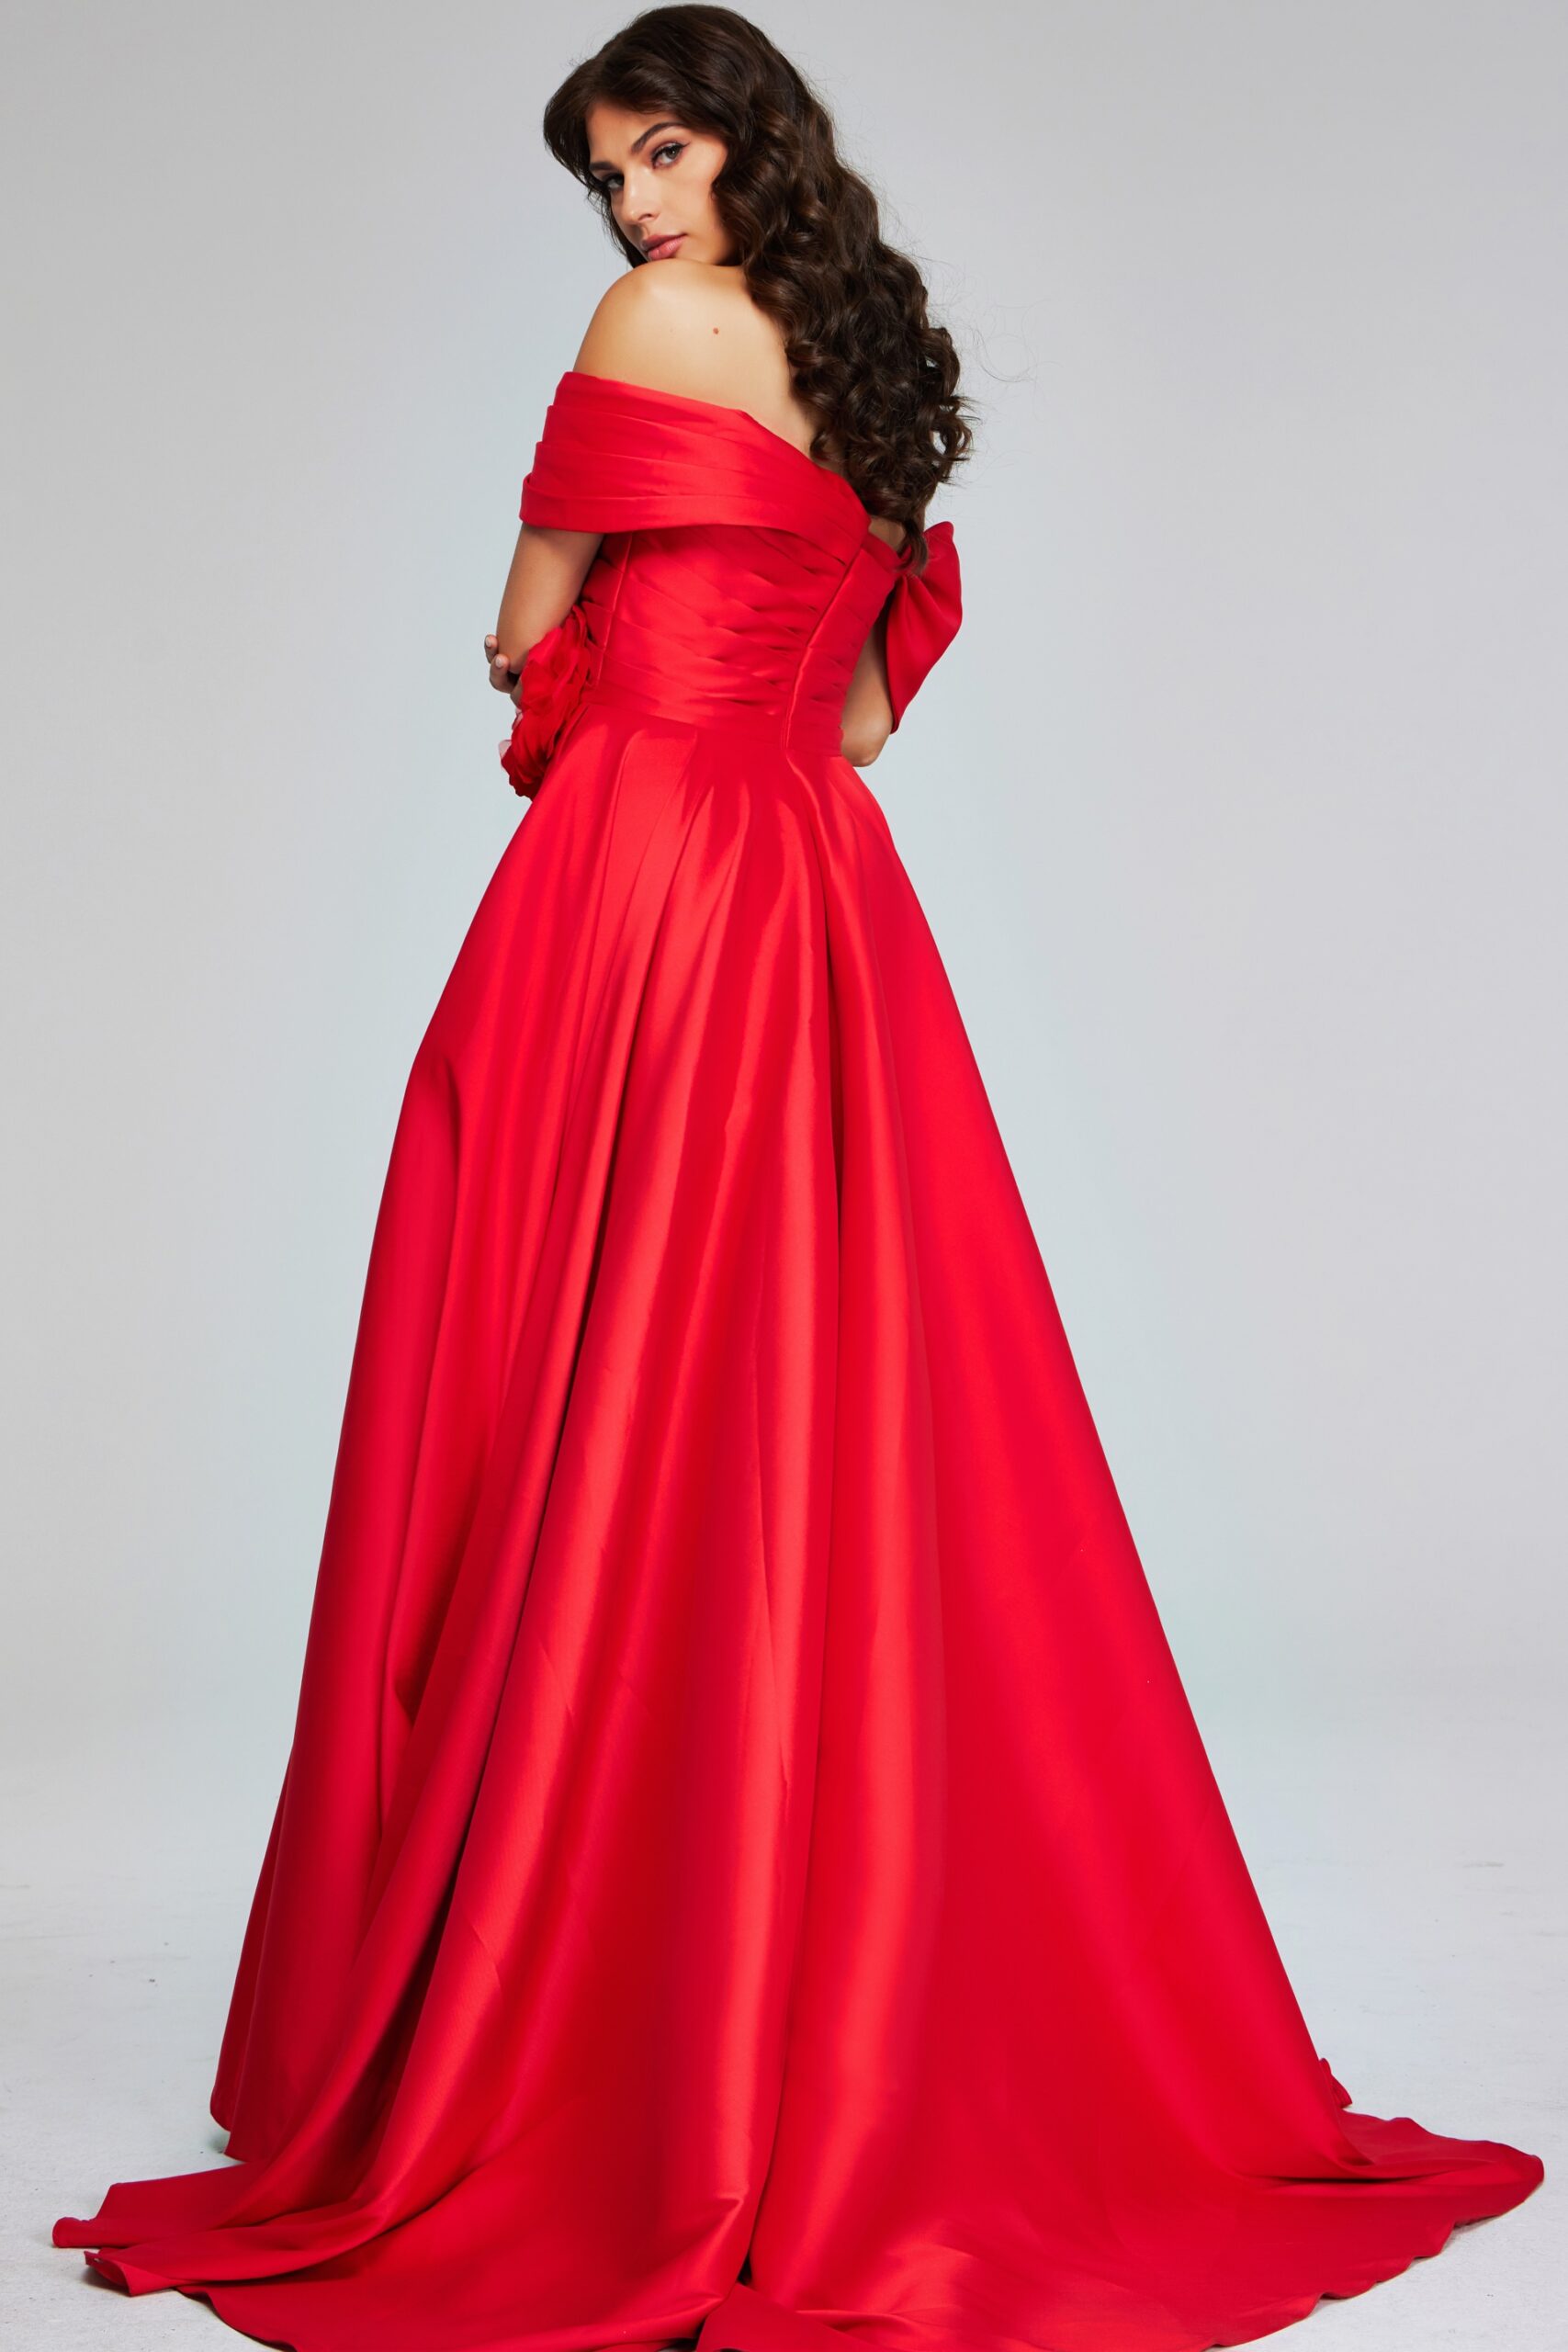 Off-Shoulder Red Gown with Flower Detail 40832